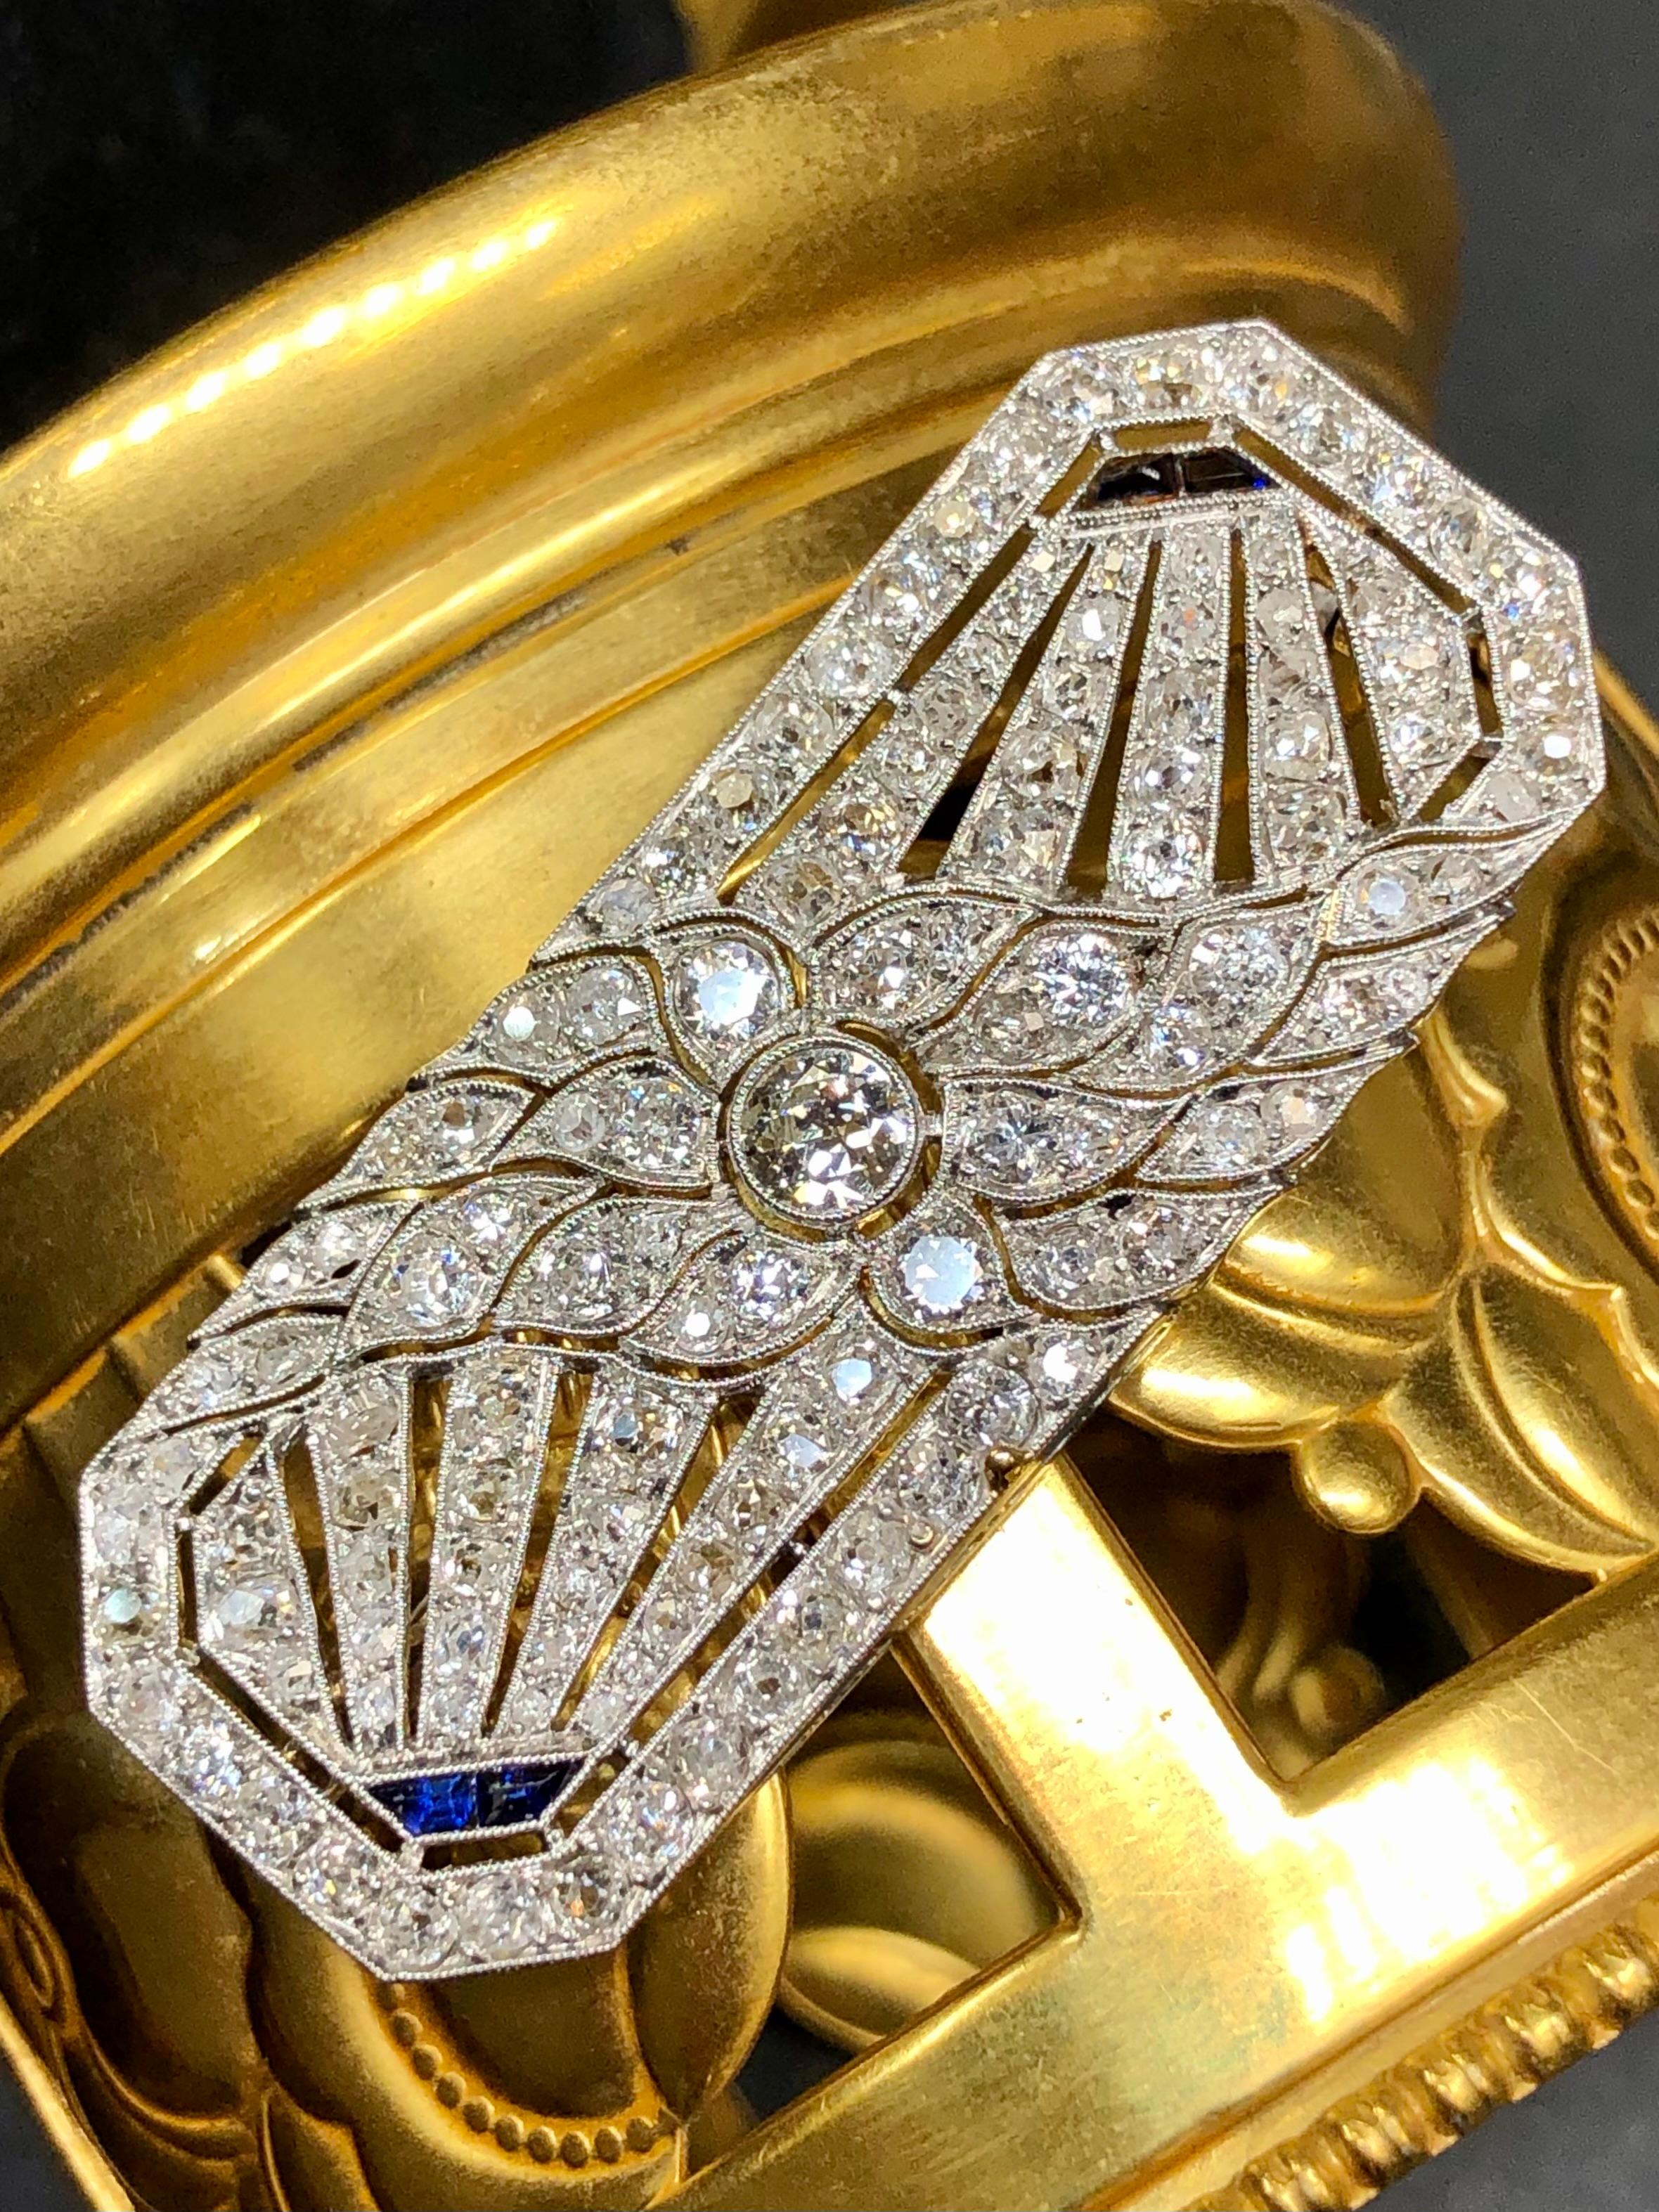 An exquisite piece of jewelry history. This early Art Deco brooch has been hand crafted in platinum and set with approximately 4.50cttw in G-I color Vs clarity old mine cut and rose cut diamonds as well as calibrated sapphires. Large central stone